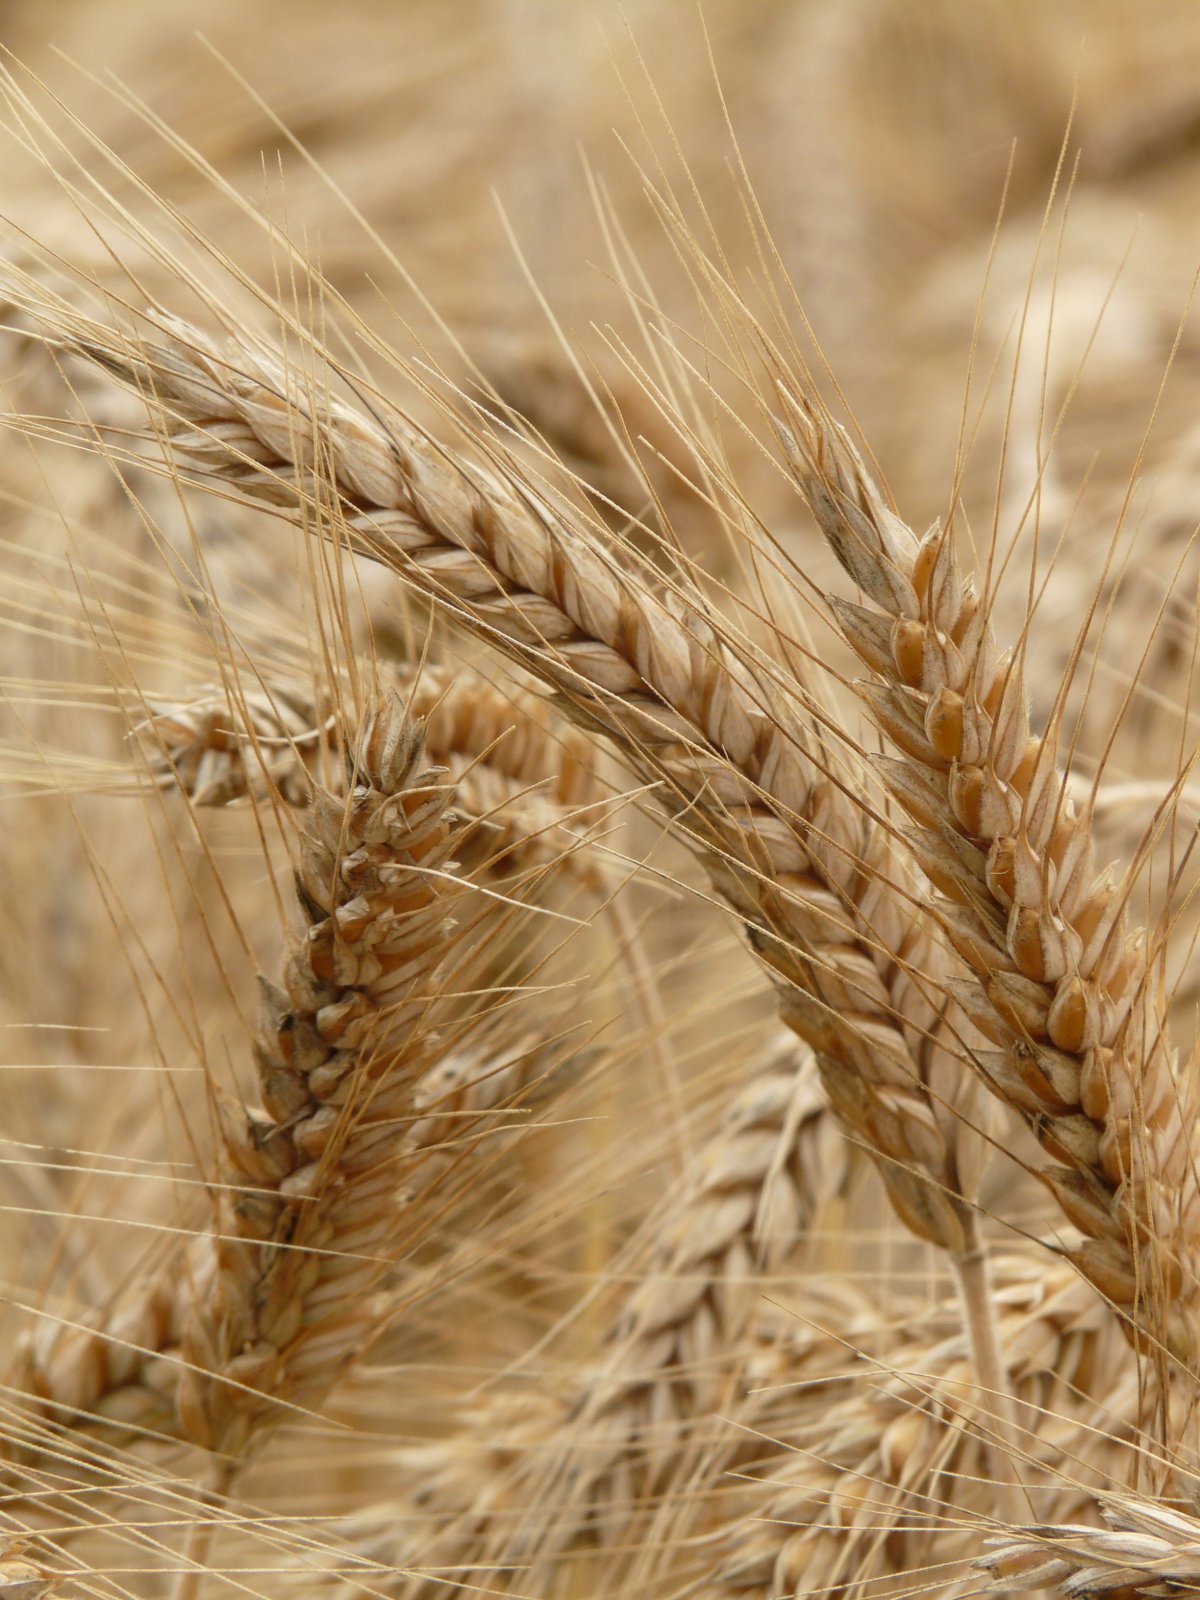 Pictures of plump wheat ears